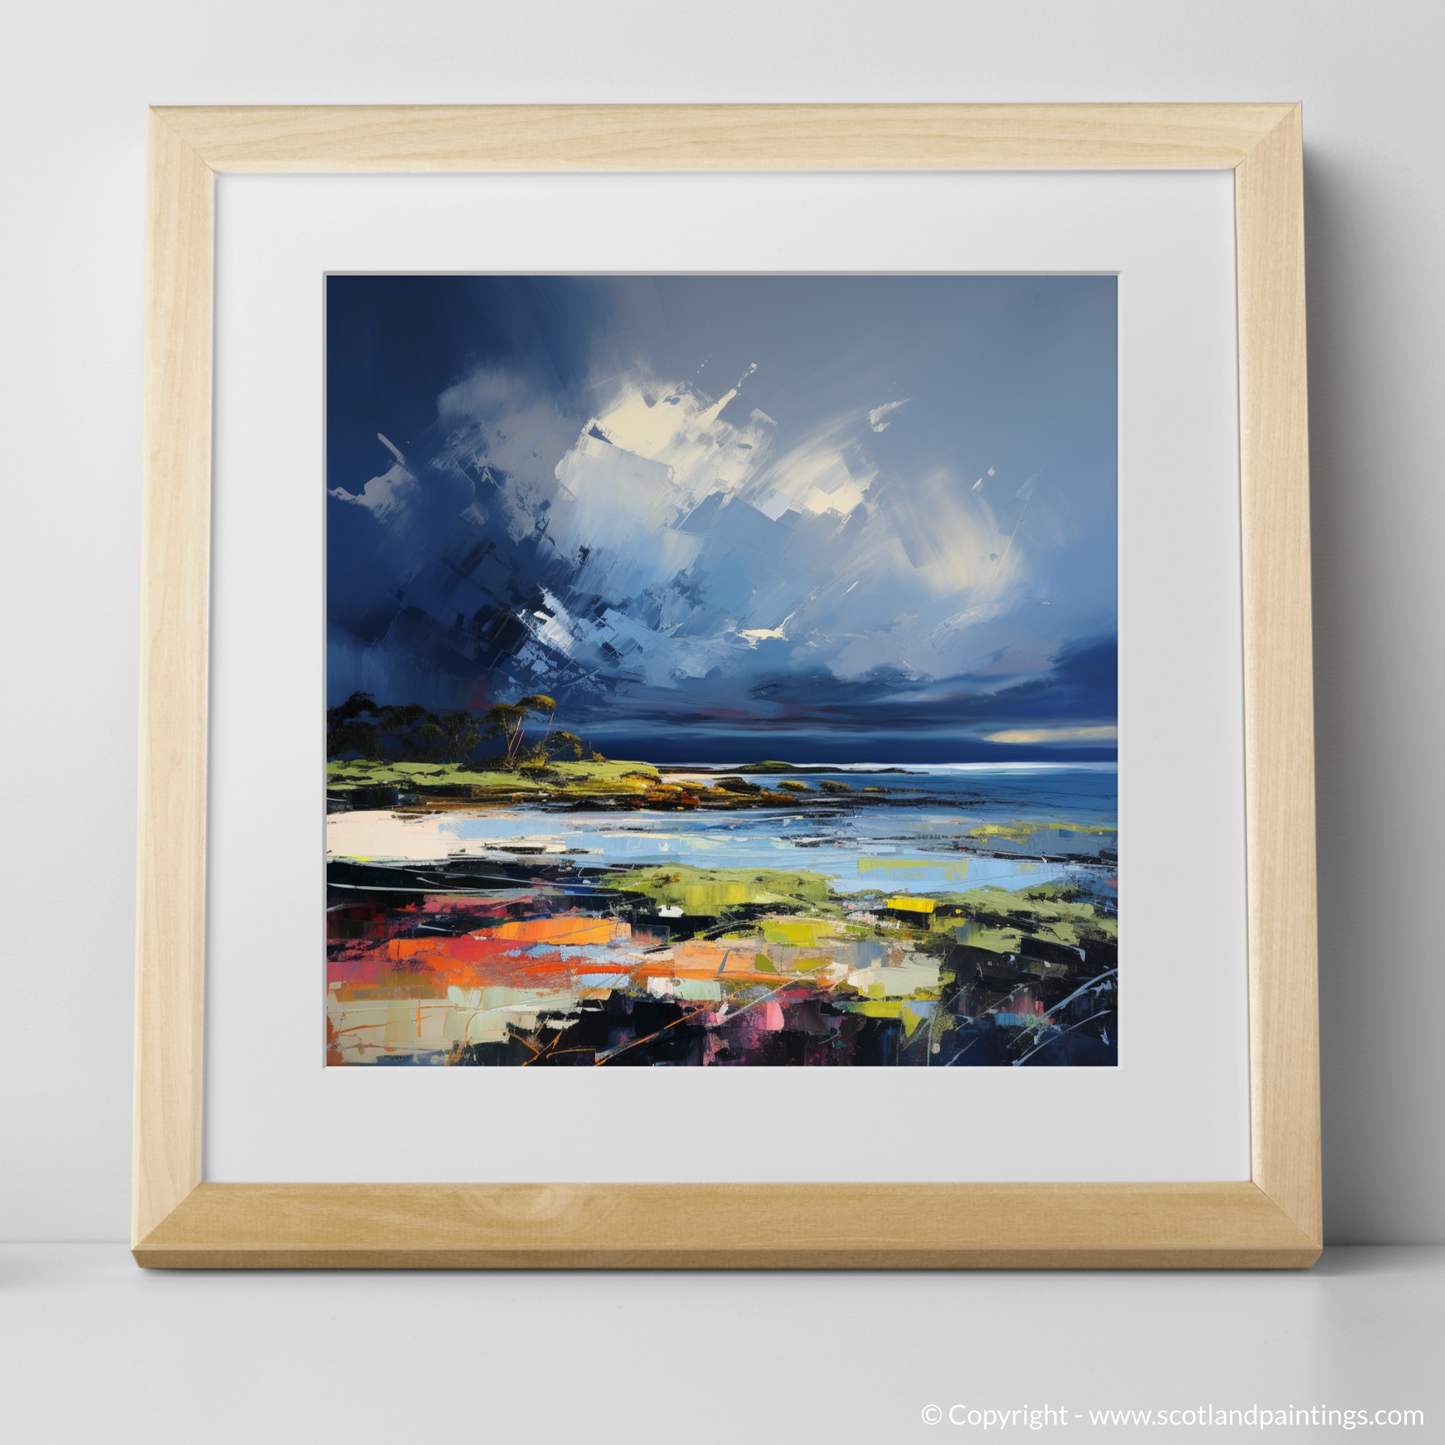 Art Print of Largo Bay with a stormy sky with a natural frame